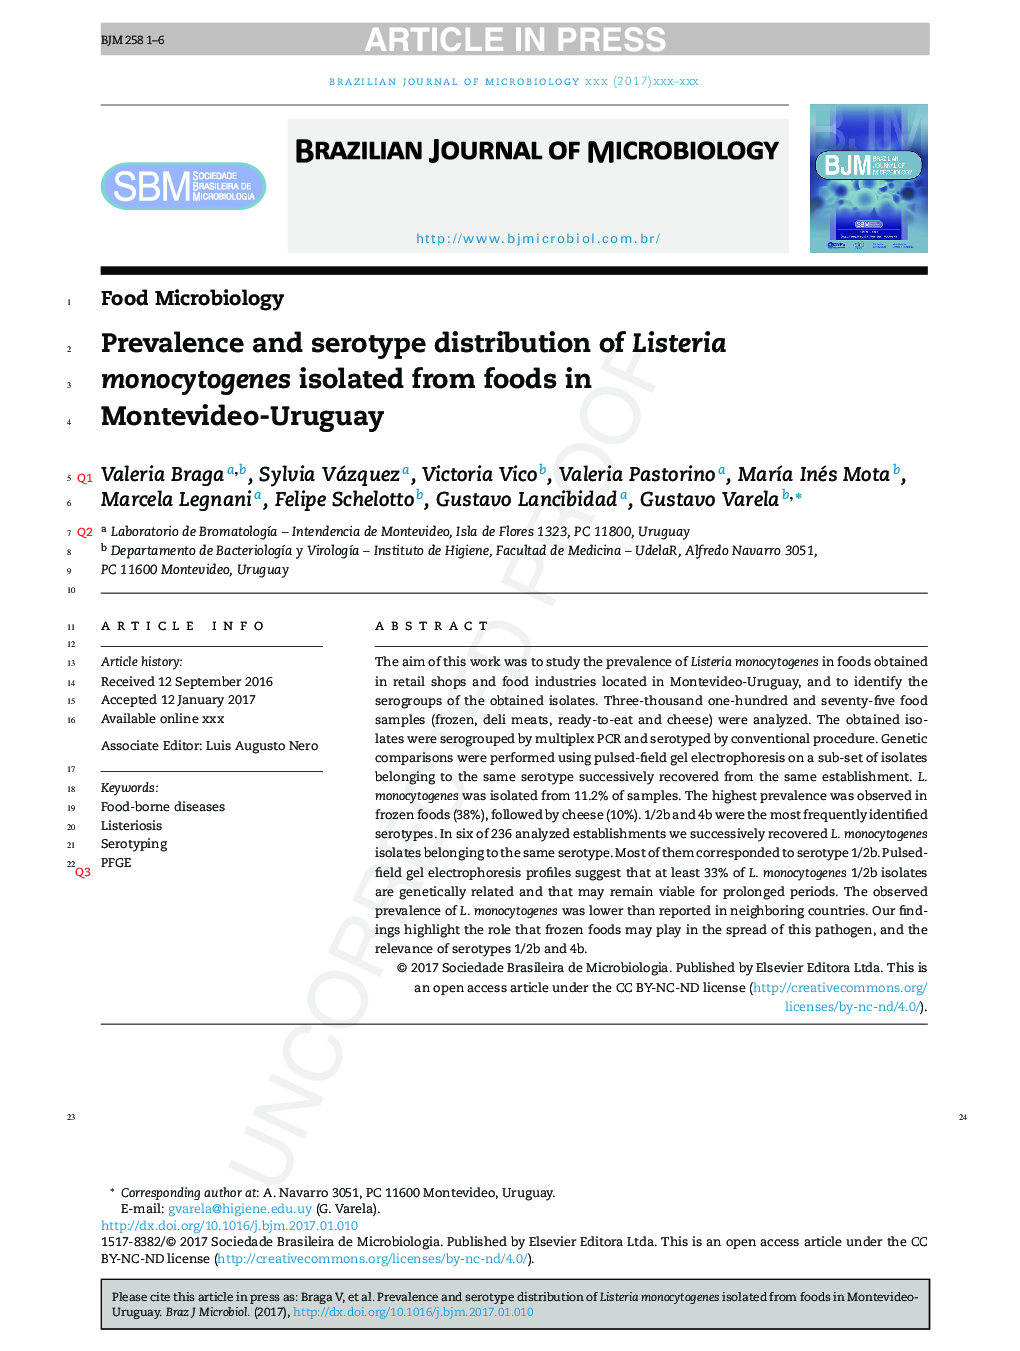 Prevalence and serotype distribution of Listeria monocytogenes isolated from foods in Montevideo-Uruguay